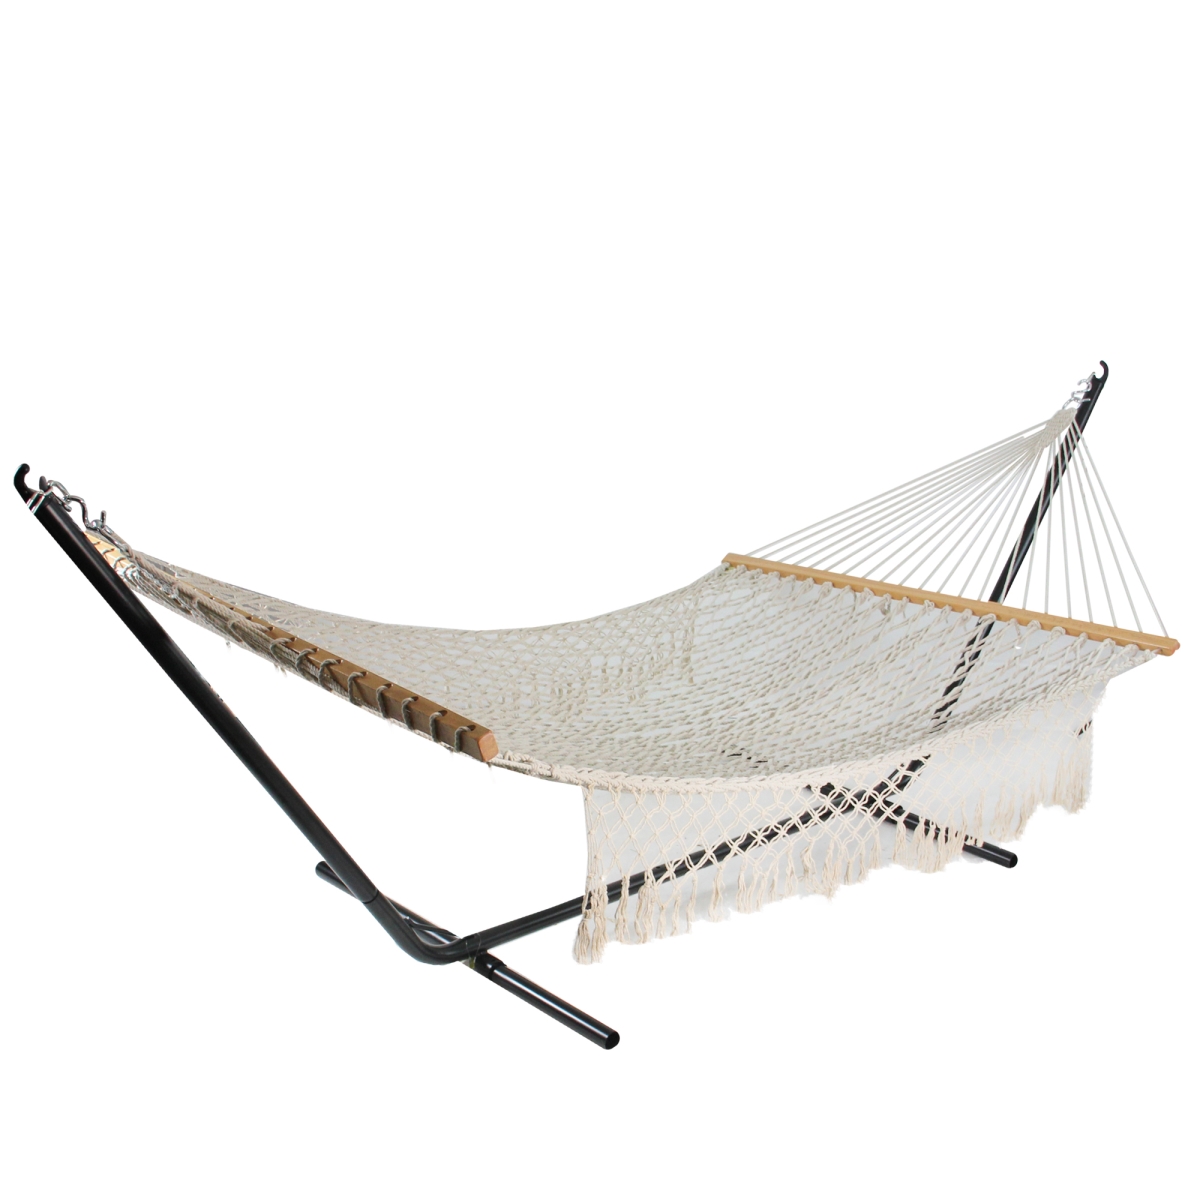 32757220 55 X 78 In. Lattice Style Rope Hammock With Wooden Bars, White